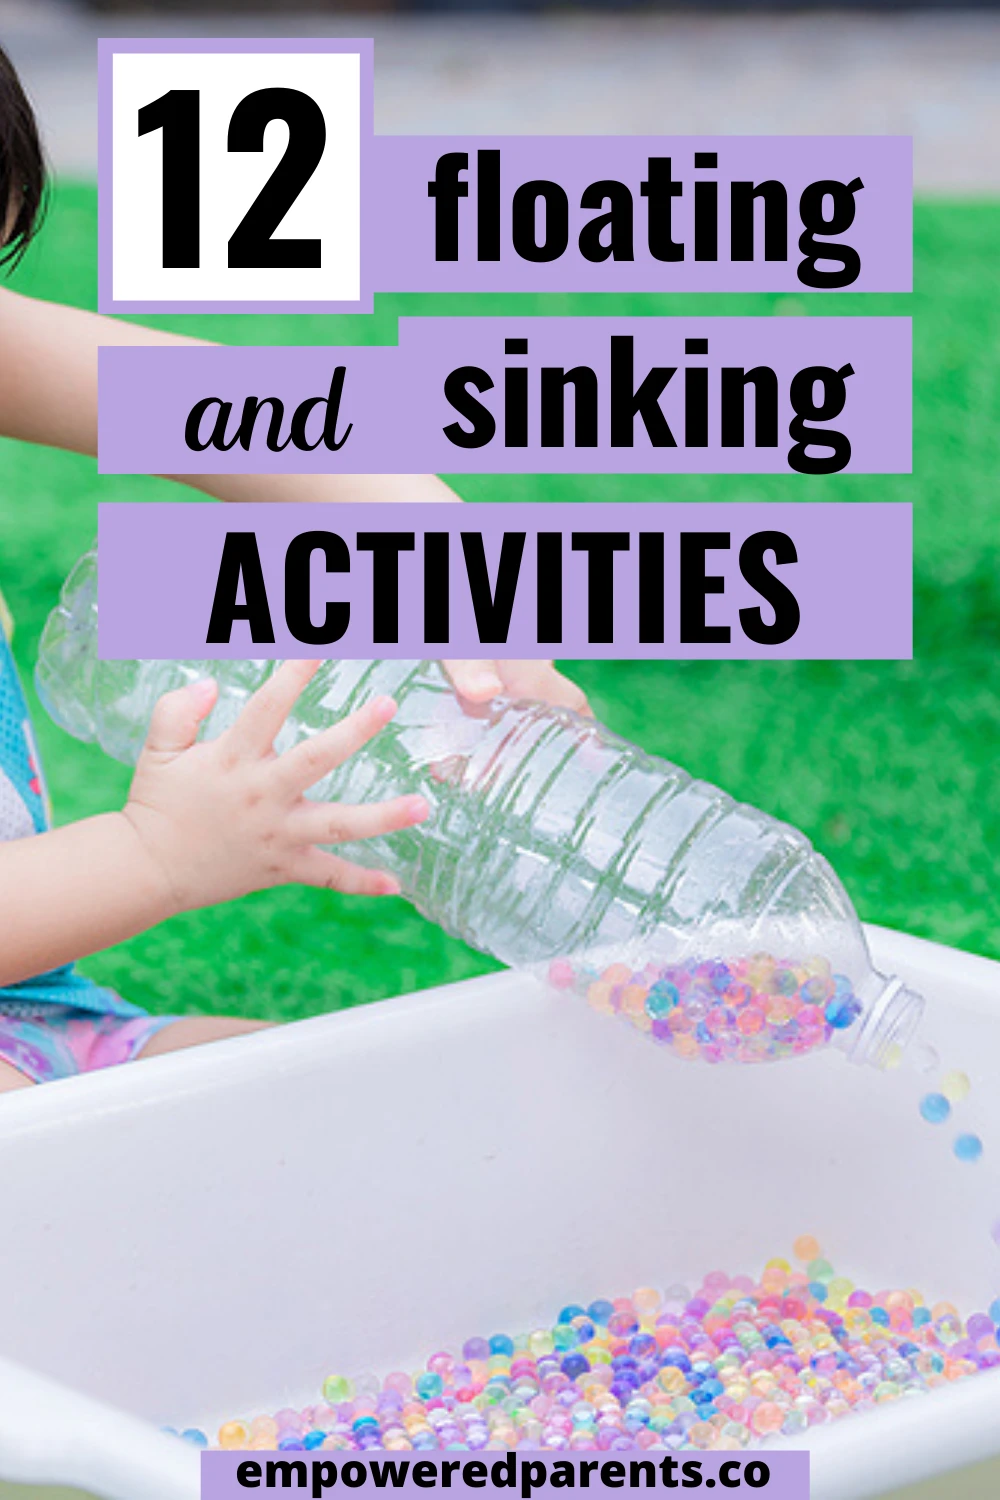 Child playing with water at a table. Text reads "12 floating and sinking activities".